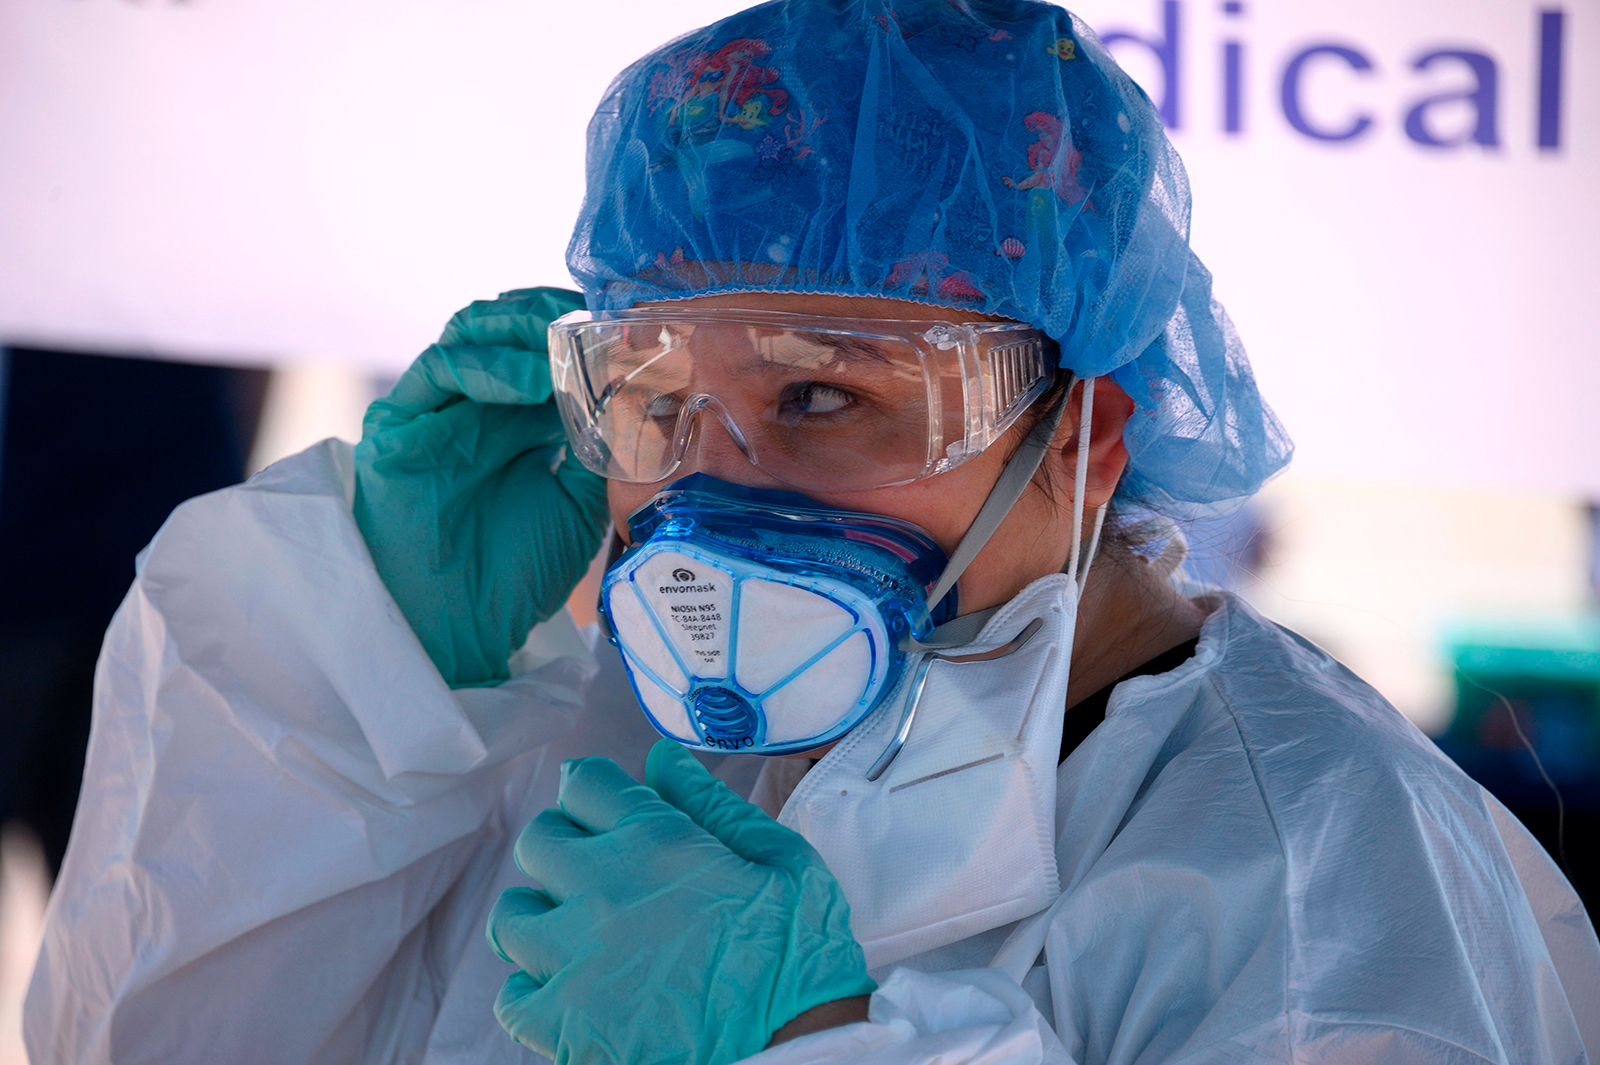 A medical worker adjusts her personal protective equipment at an antibody rapid serological testing site on July 26, in San Dimas, California.